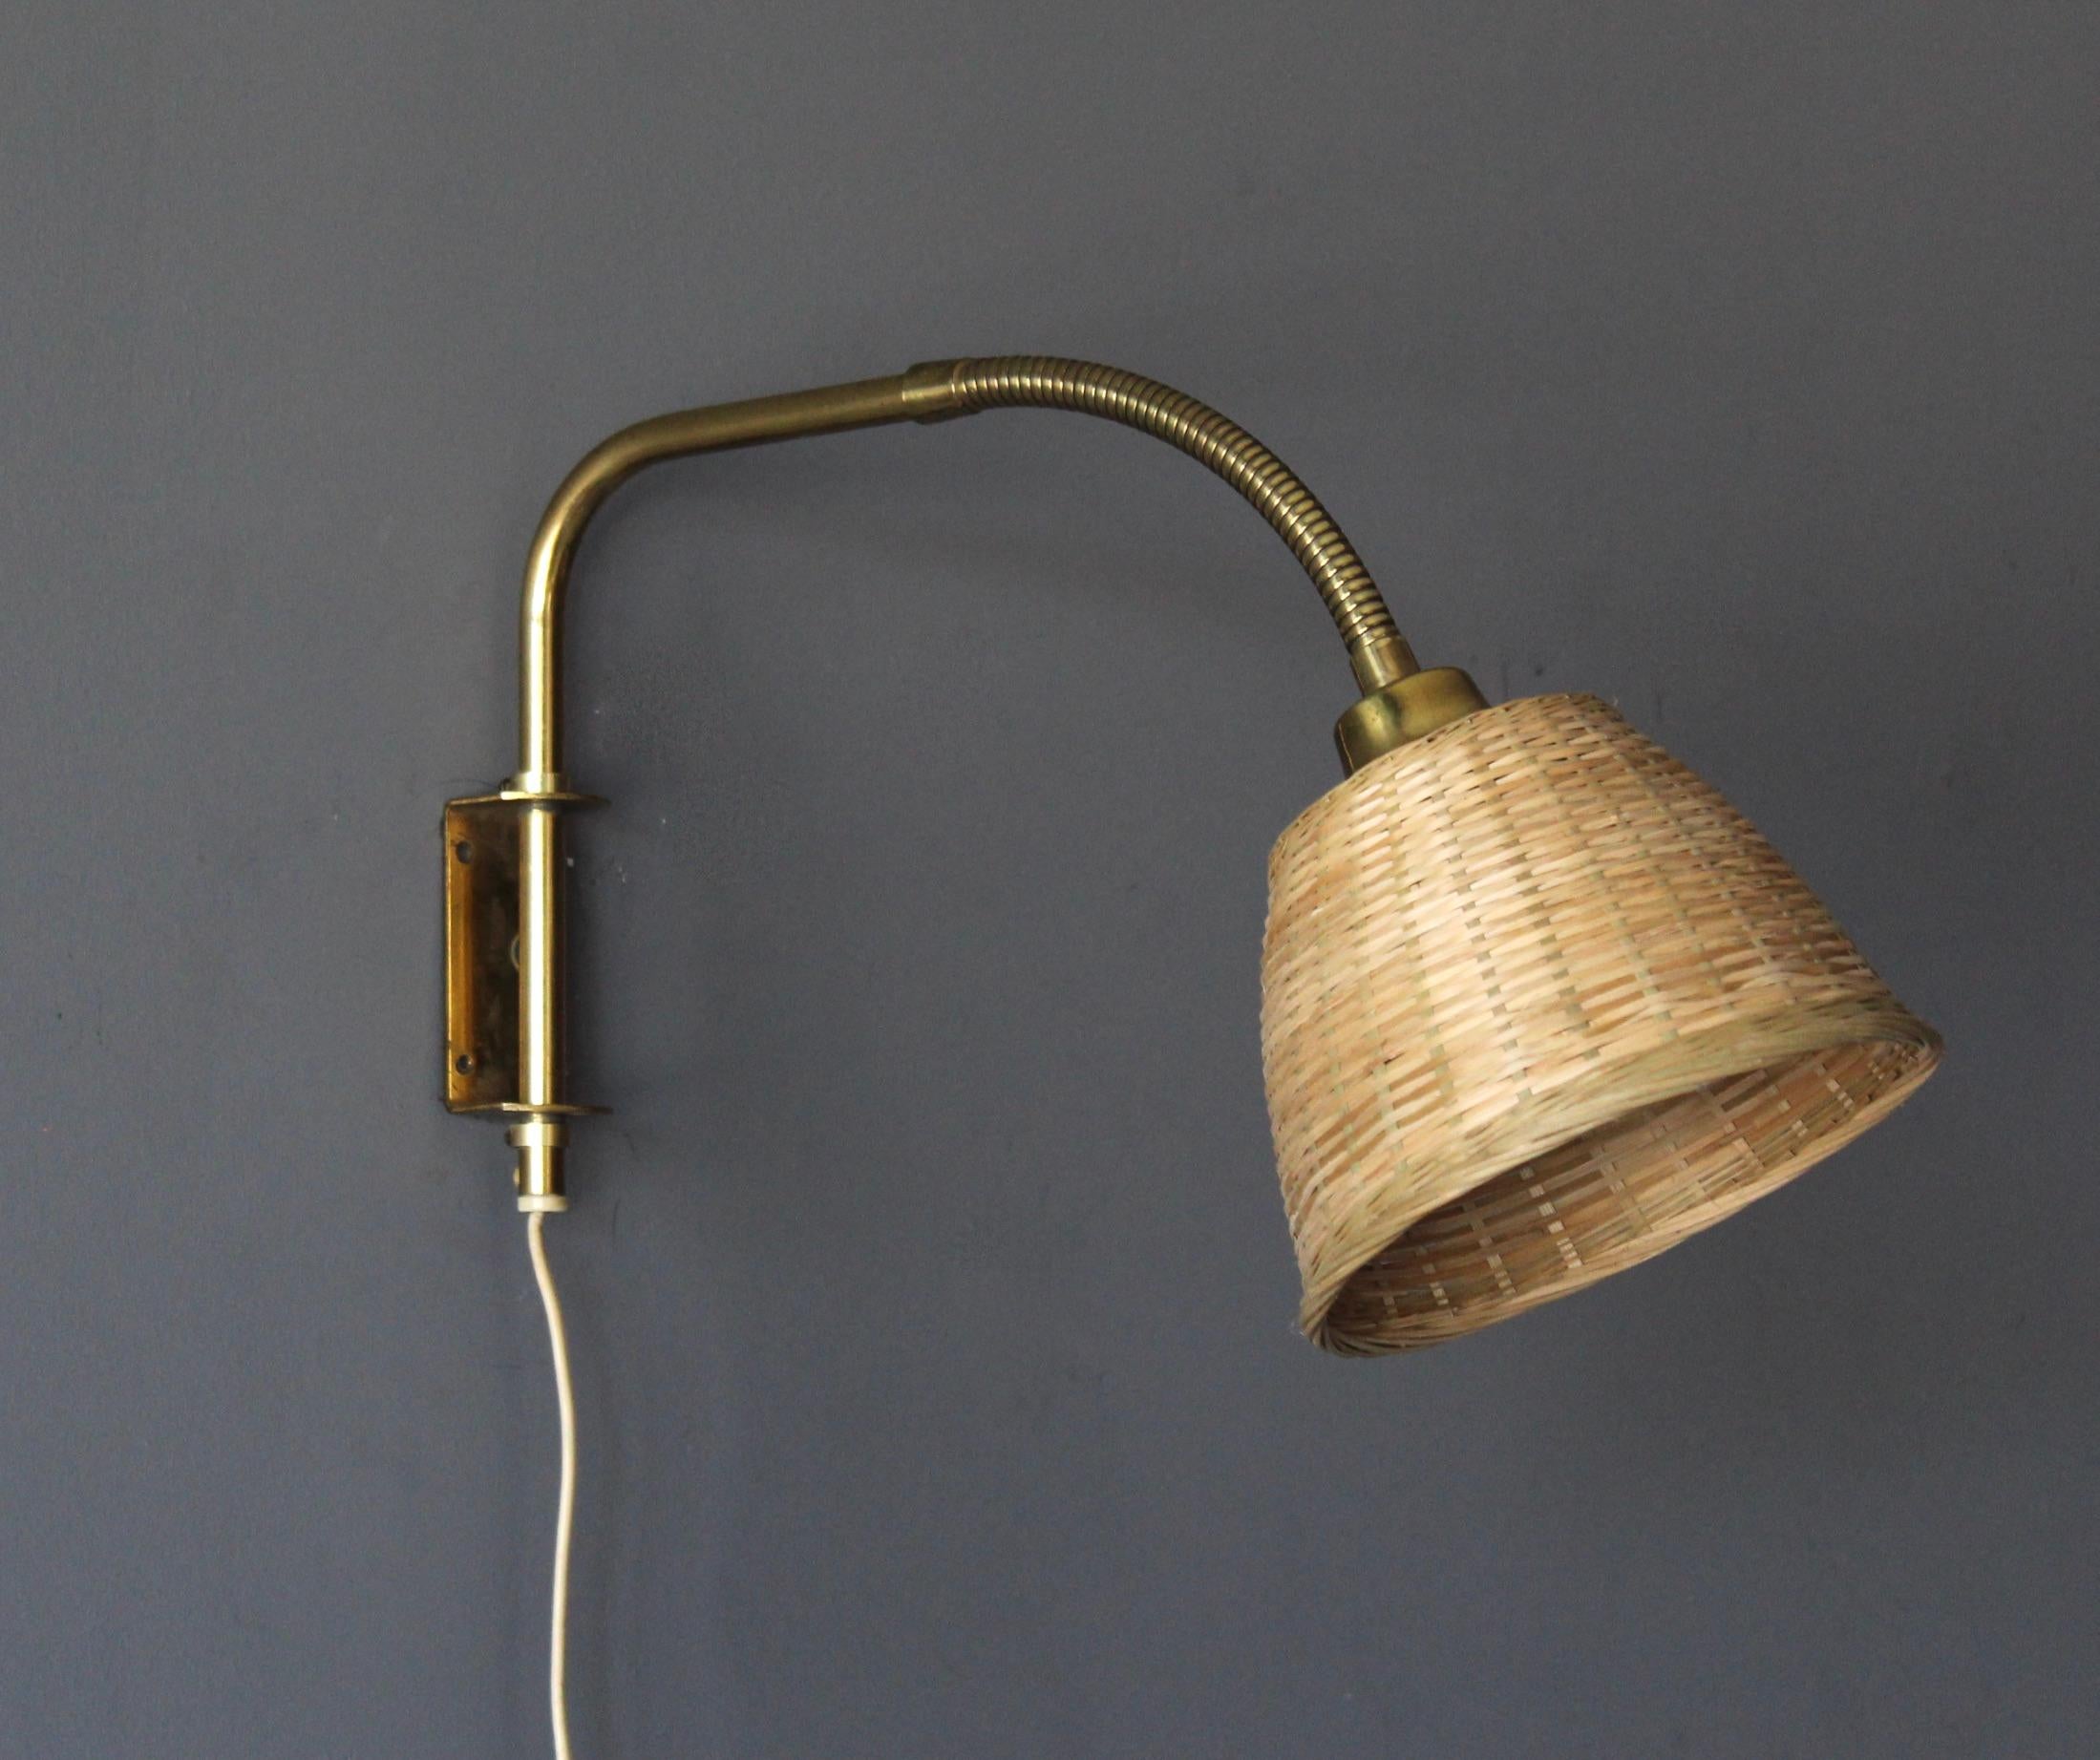 A functionalist wall light / task light, designed and produced in Sweden, 1940s-1950s. Features brass. Assorted vintage rattan lampshade.

Takes one lightbulb on E27 socket. No stated max wattage, not UL listed.

